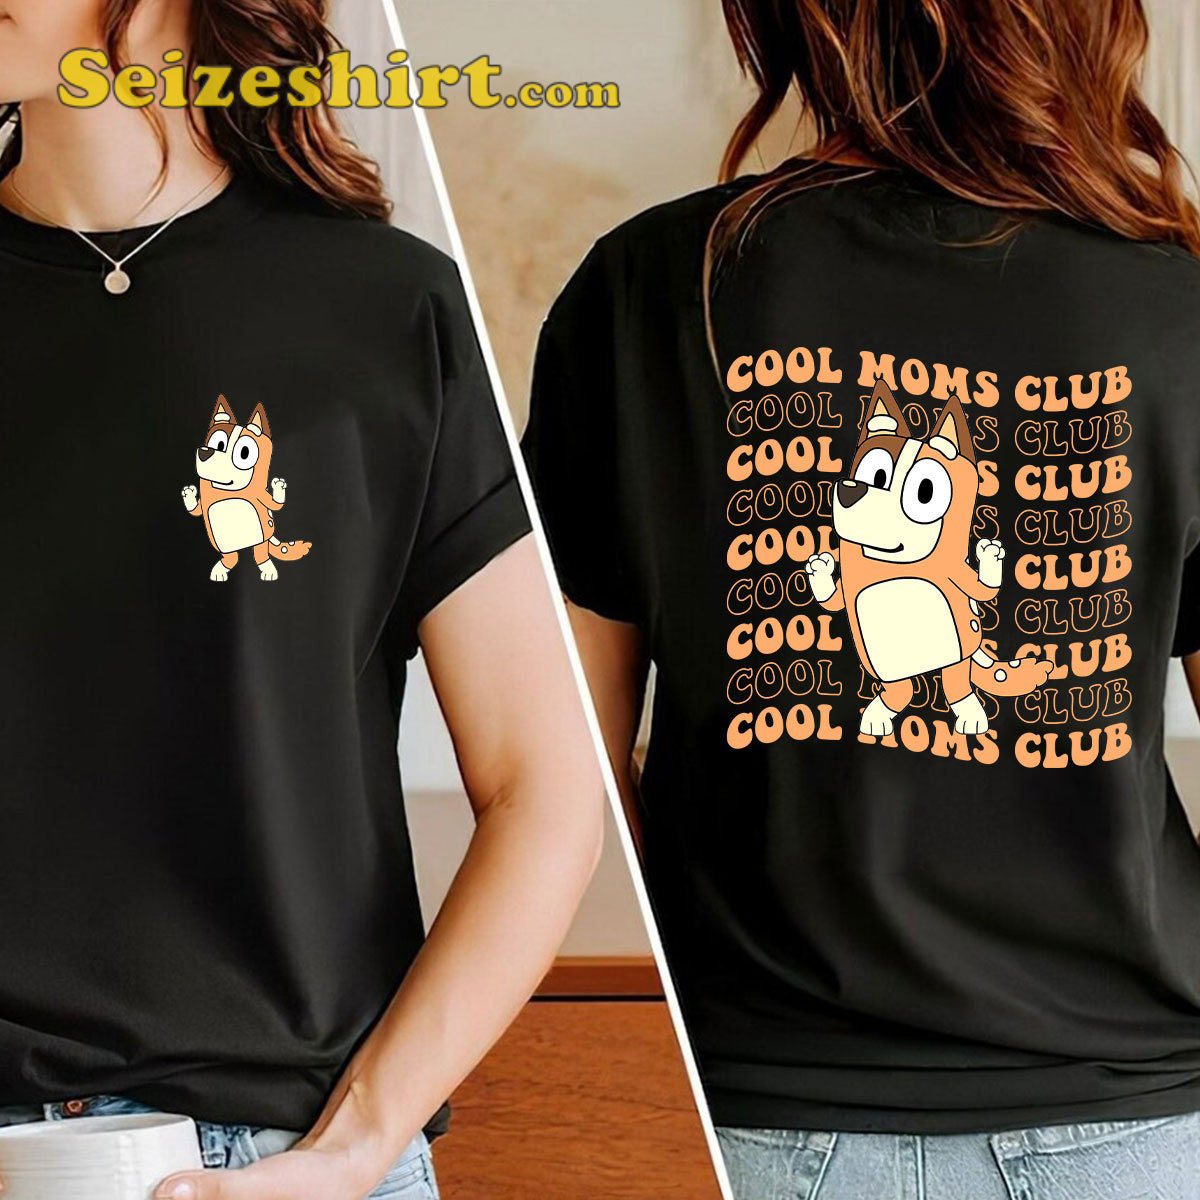 If you are looking for a ideal gift for mom on Mother's Day, what better than Bluey Family Cool Moms Club Graphic T-shirt? Don't miss out the chance!
seizeshirt.com/bluey-family-c… 
#Bluey #Mum #Blueysurprise #Blueytwt #MothersDay #Trending #Seizeshirt